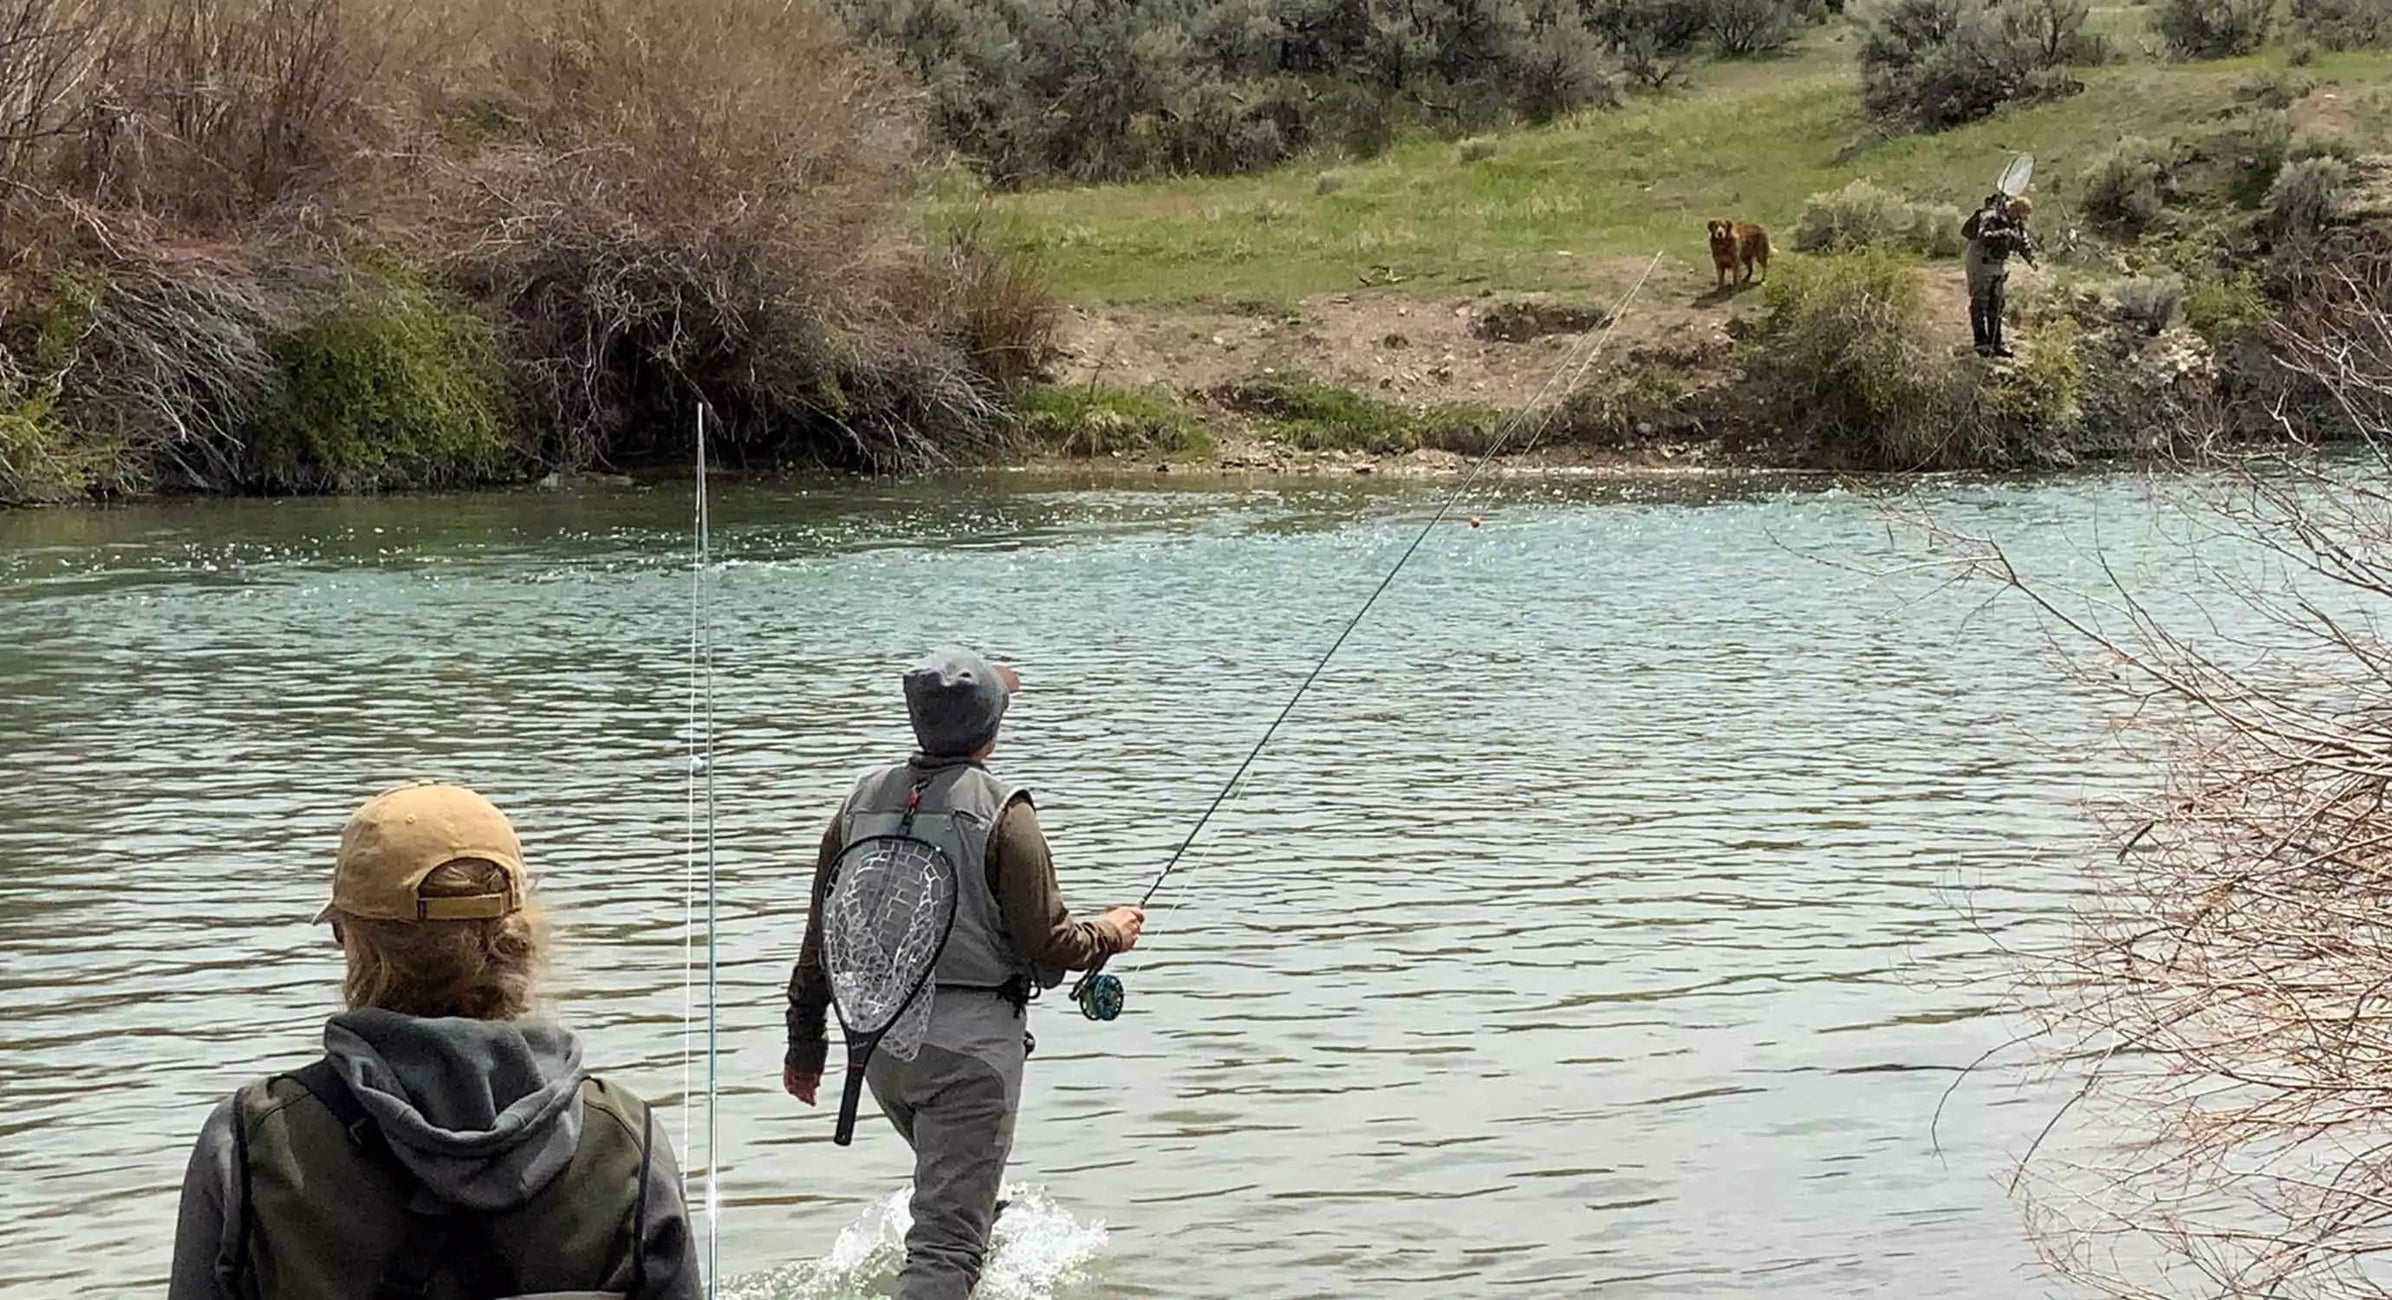 Fly Fishing LIfestyle: People at the River